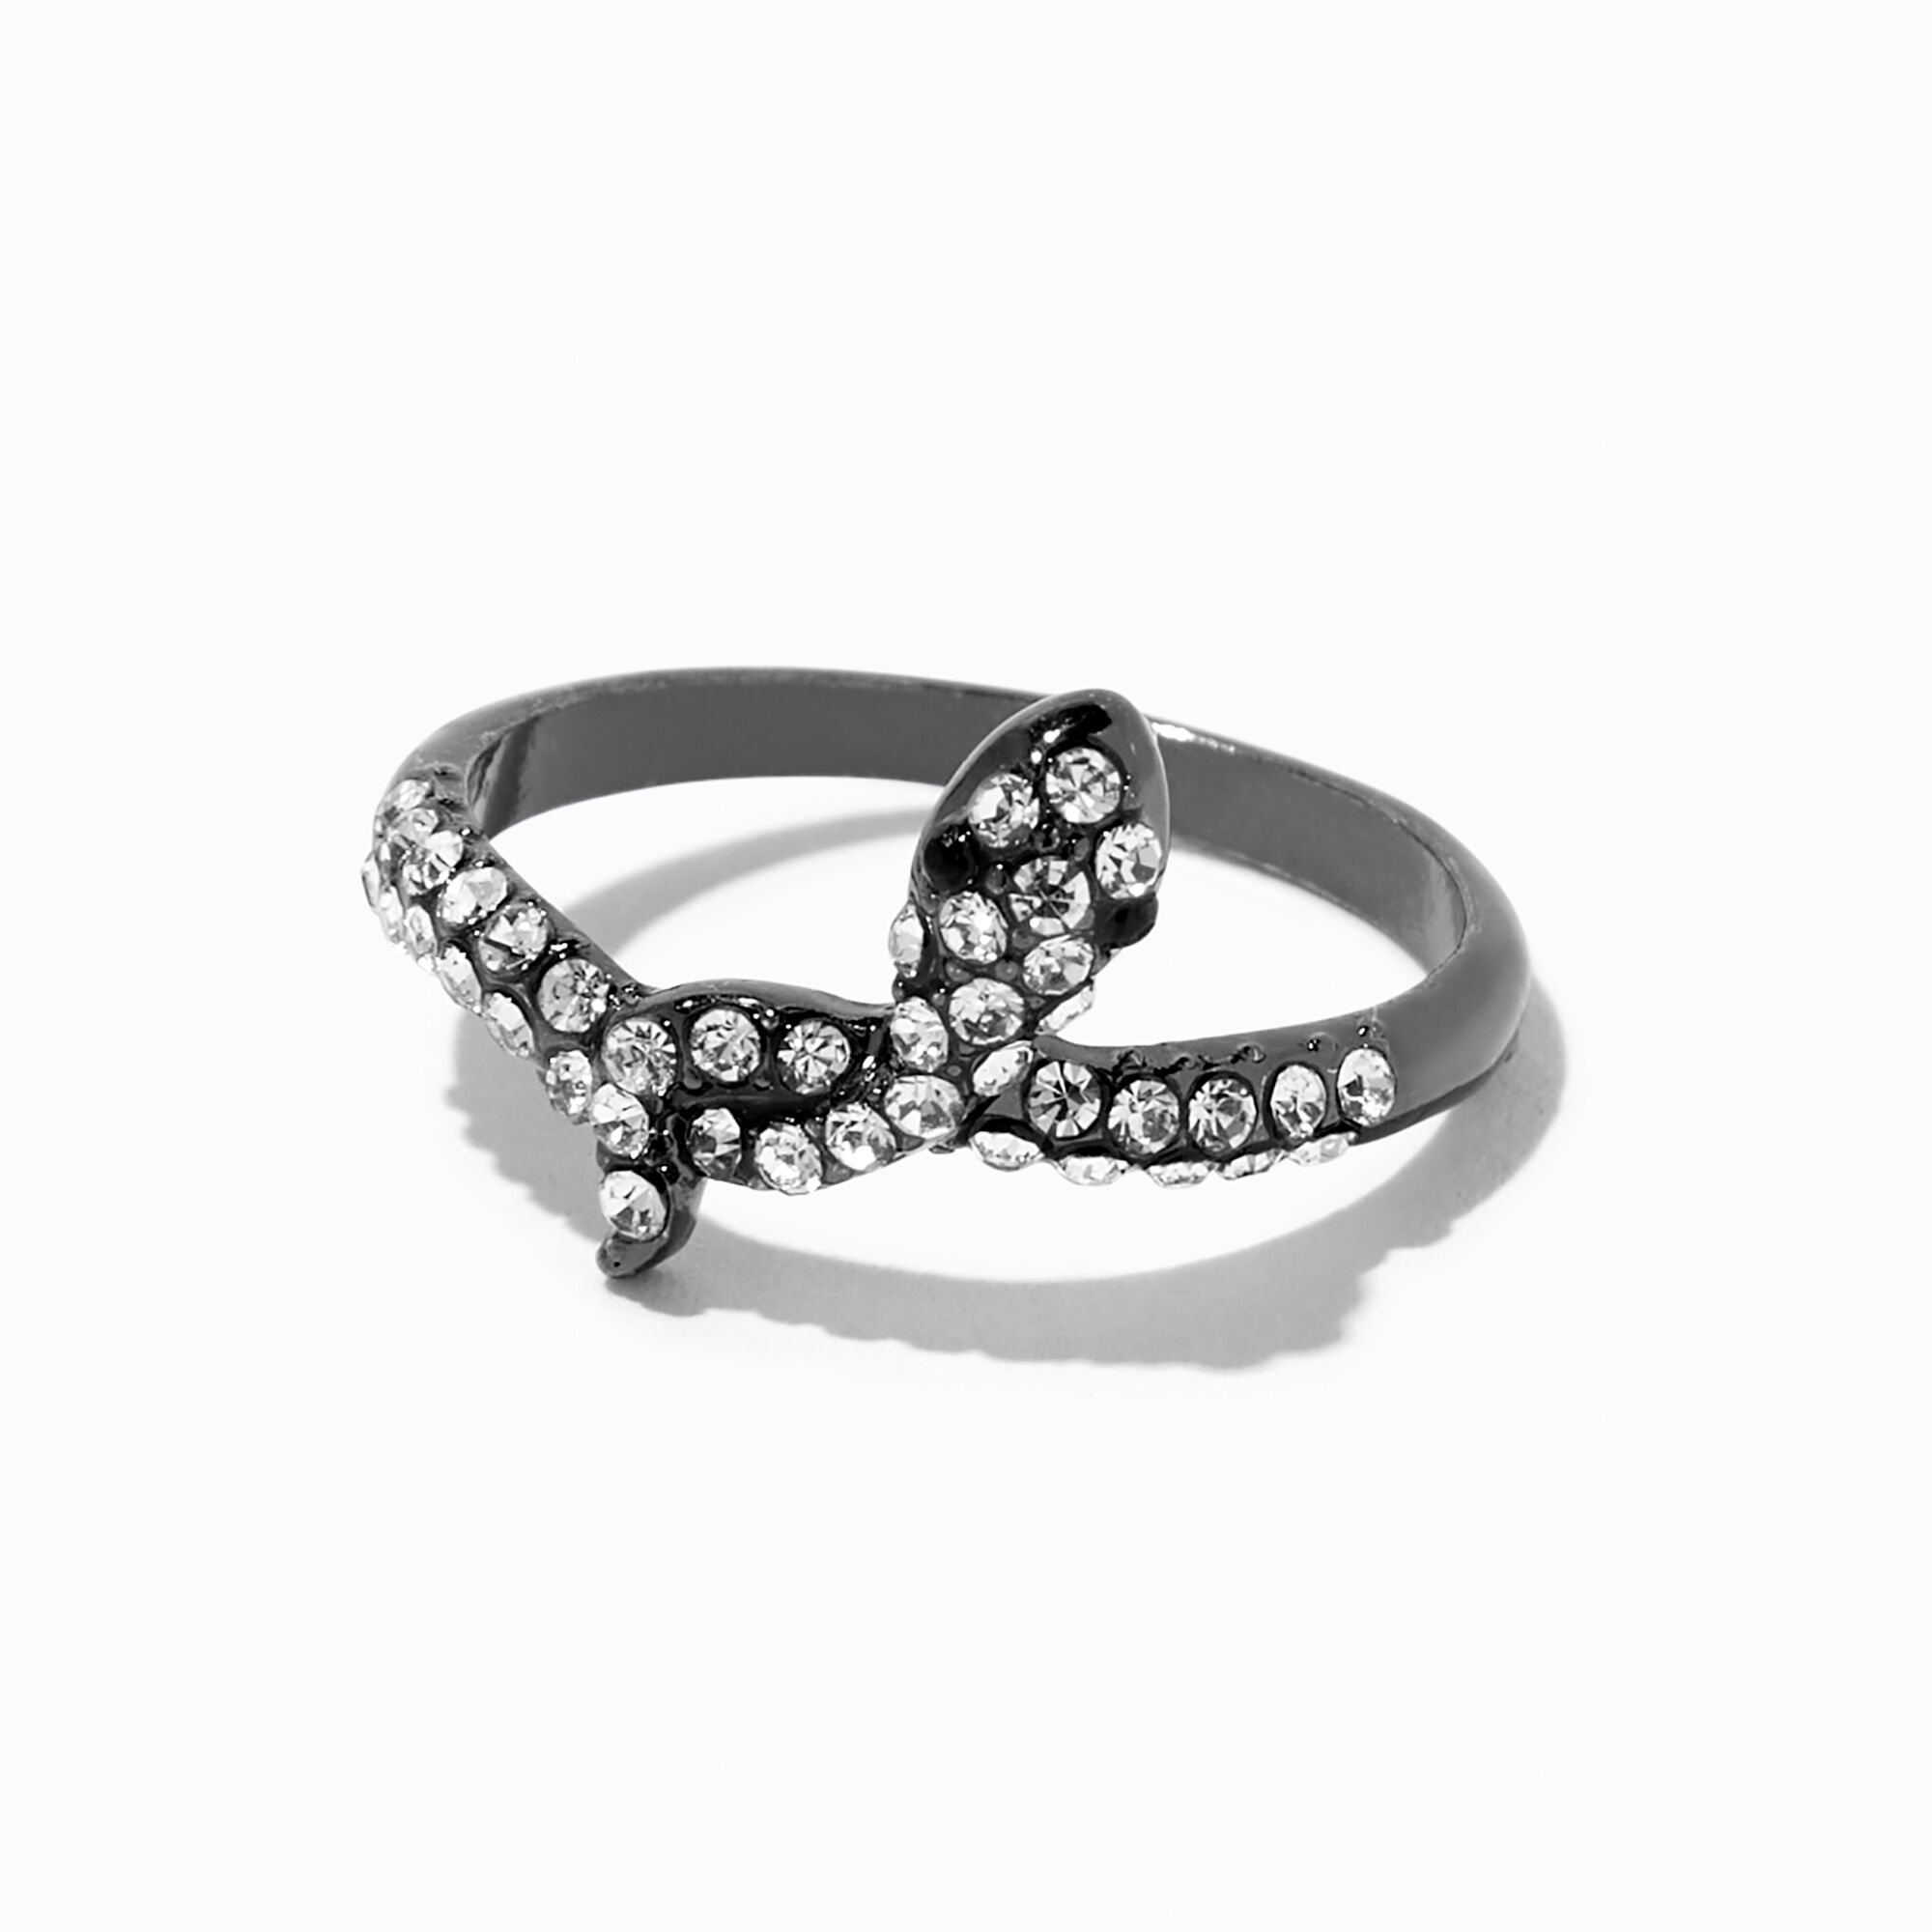 View Claires Hematite Crystal Snake Knot Ring information